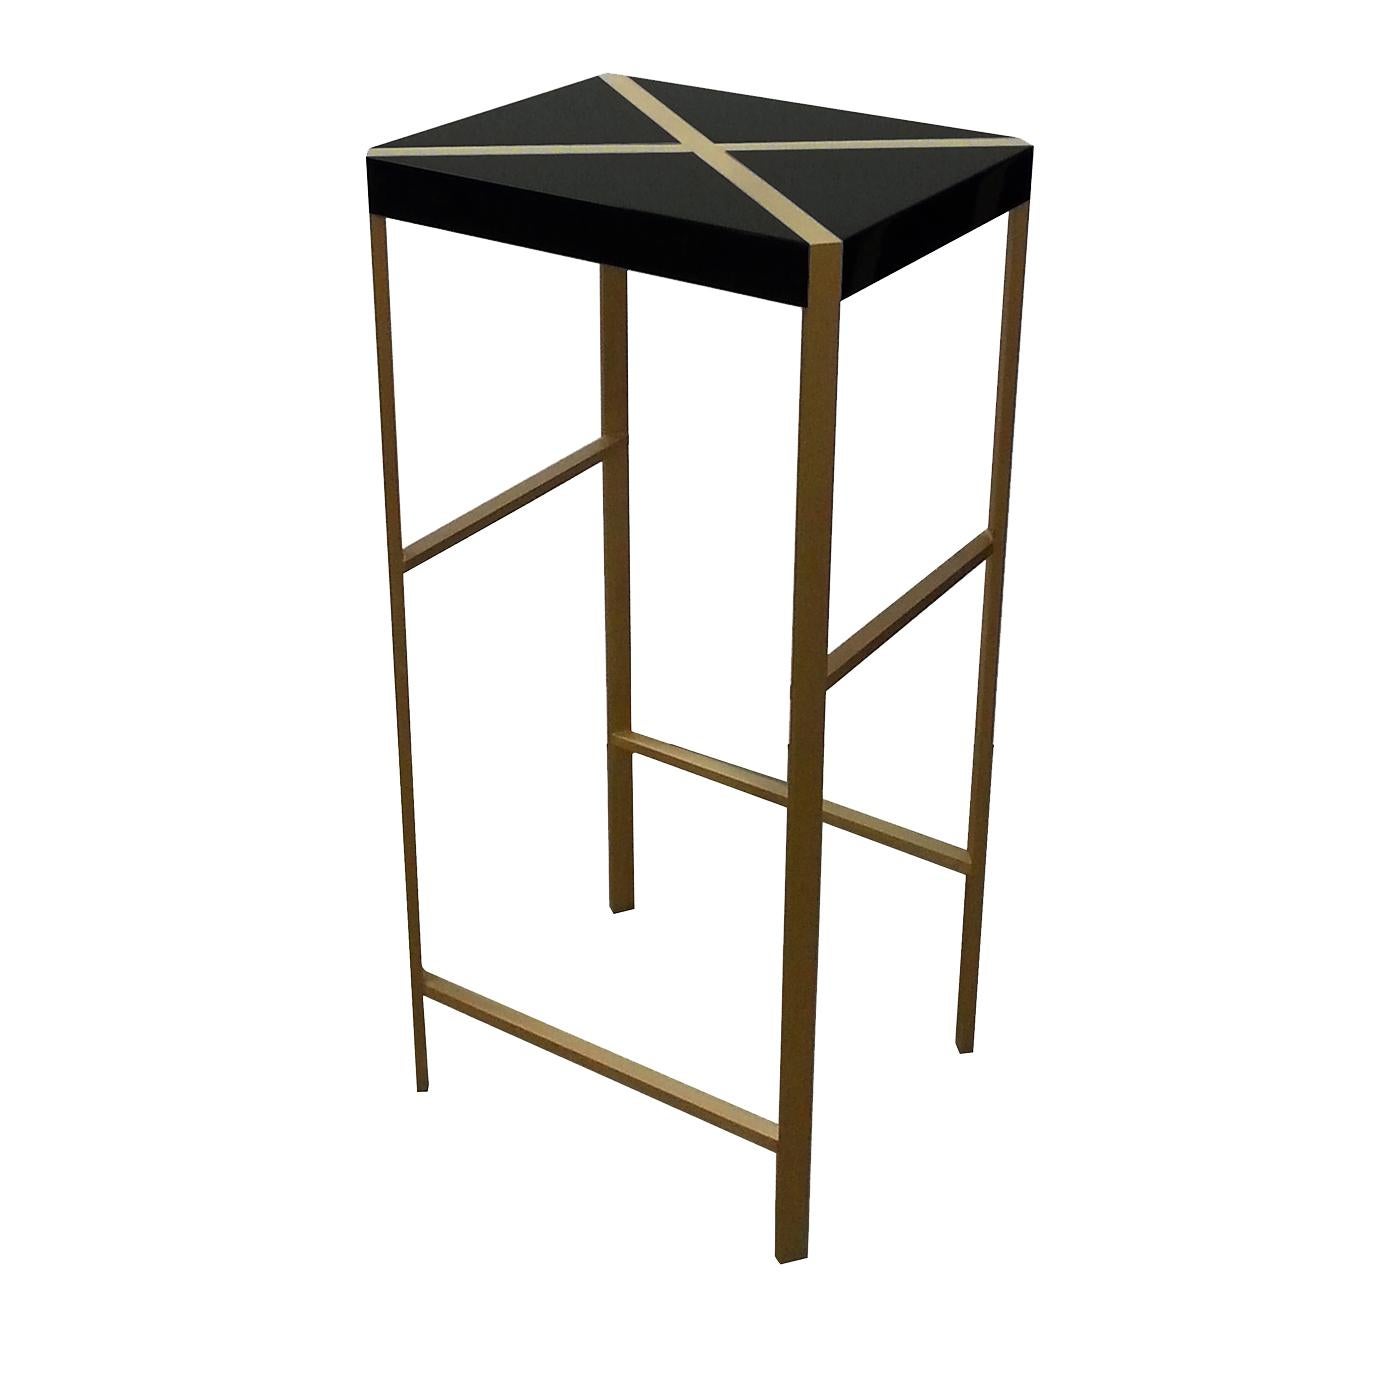 This striking stool complements any of the pieces in the Metaphysics collection. Its legs are in brass and the wood top, decorated with a diagonal brass cross, is finished with a hand-applied premium resistant lacquer, for a Minimalist, elegant look.